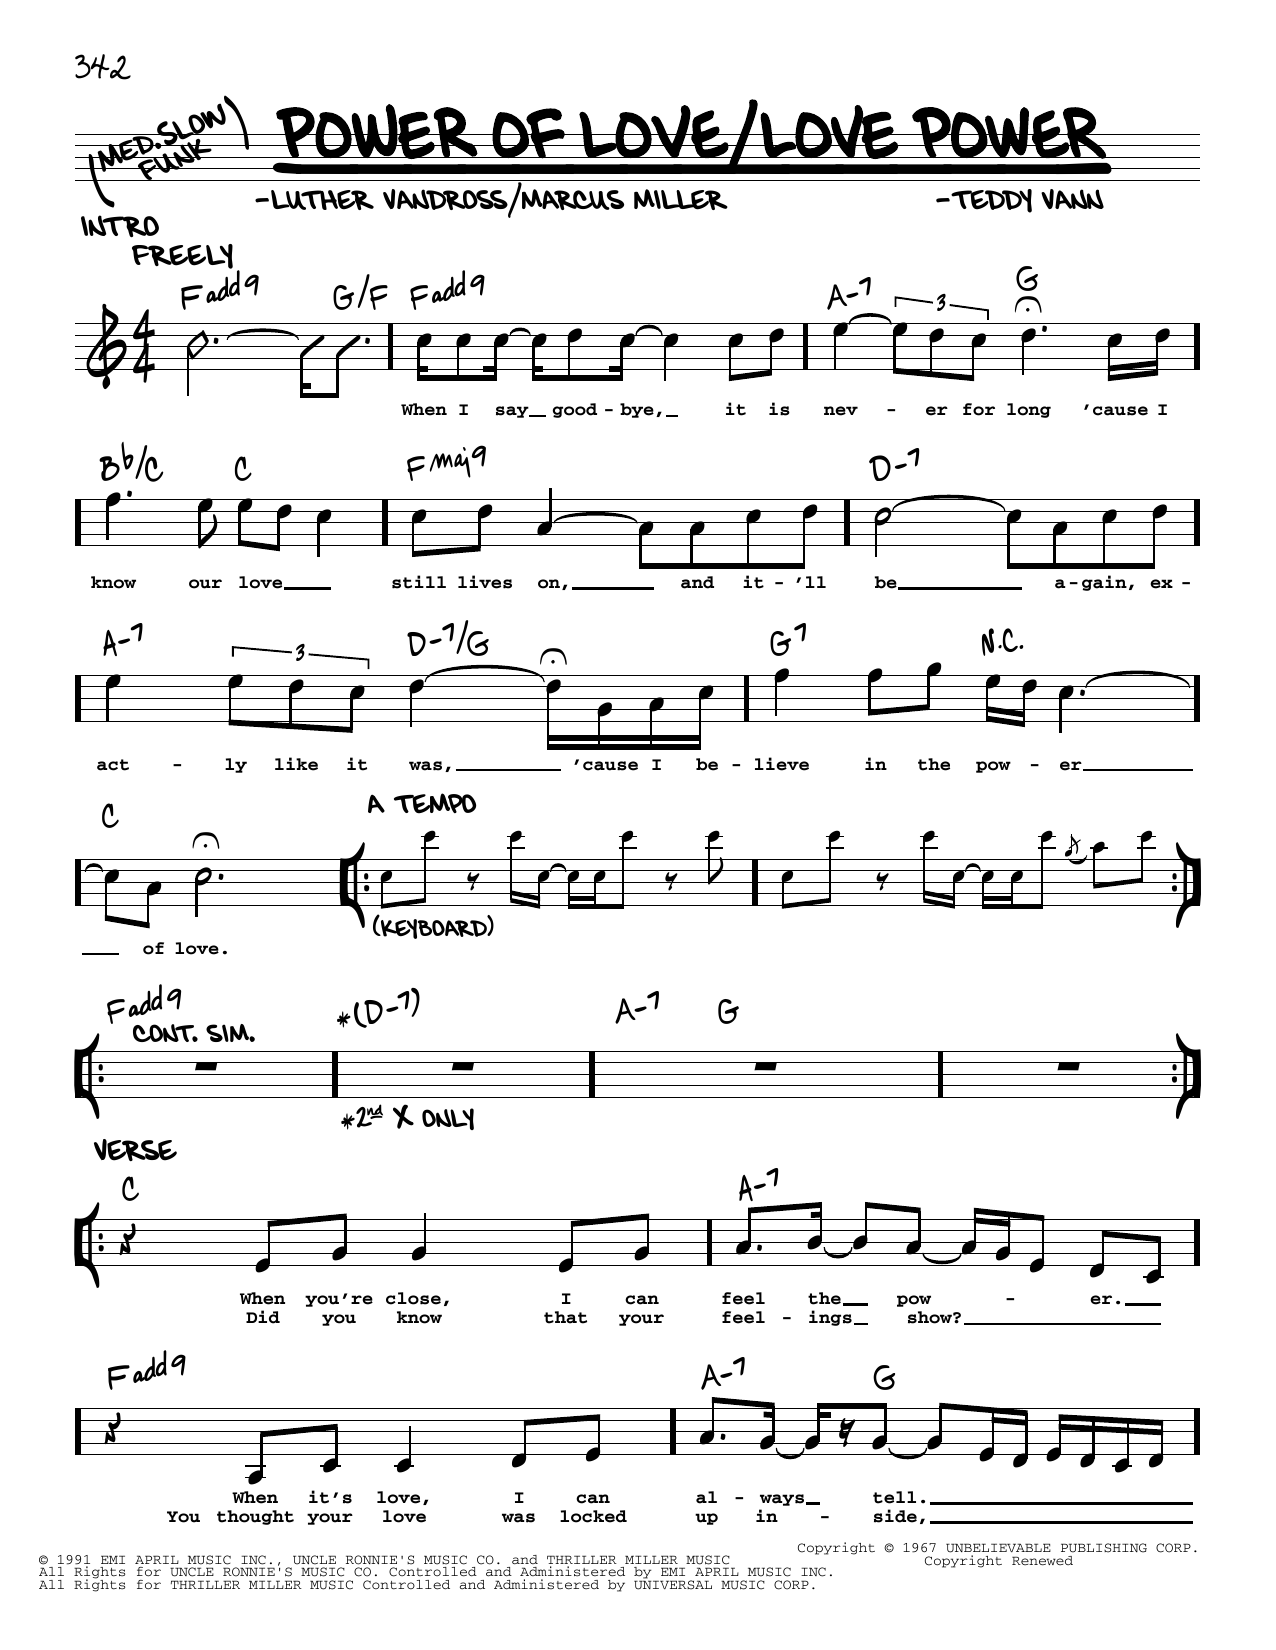 Download Luther Vandross Power Of Love/Love Power Sheet Music